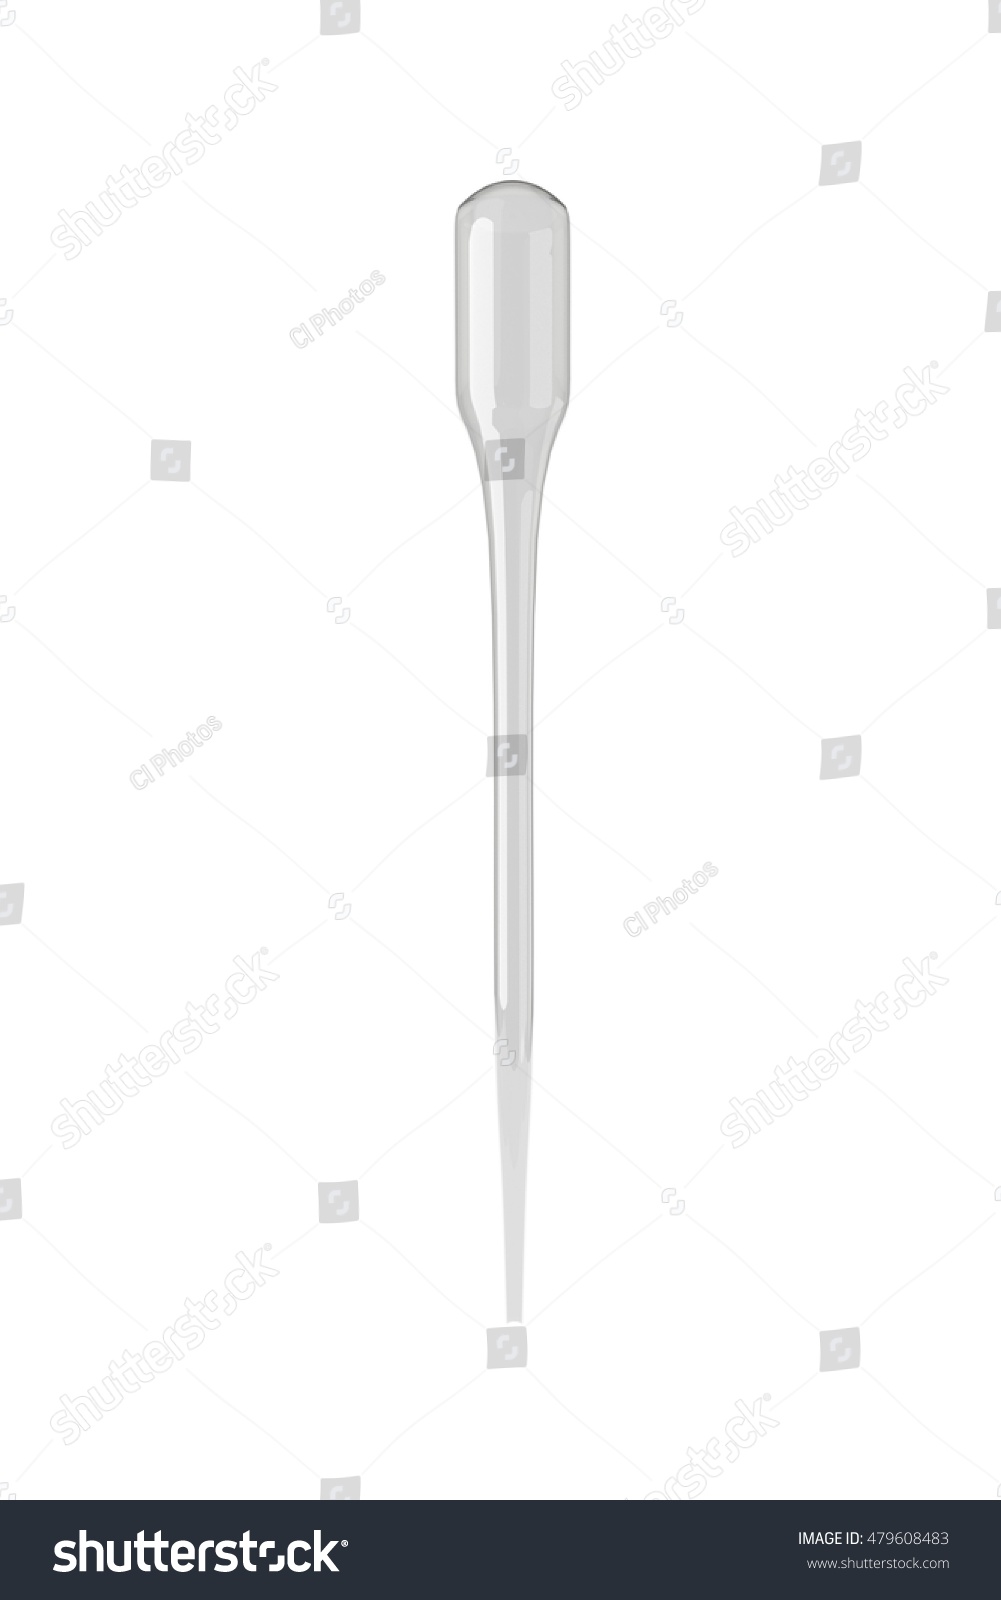  Plastic Pipette medical glassware for experiments  #479608483